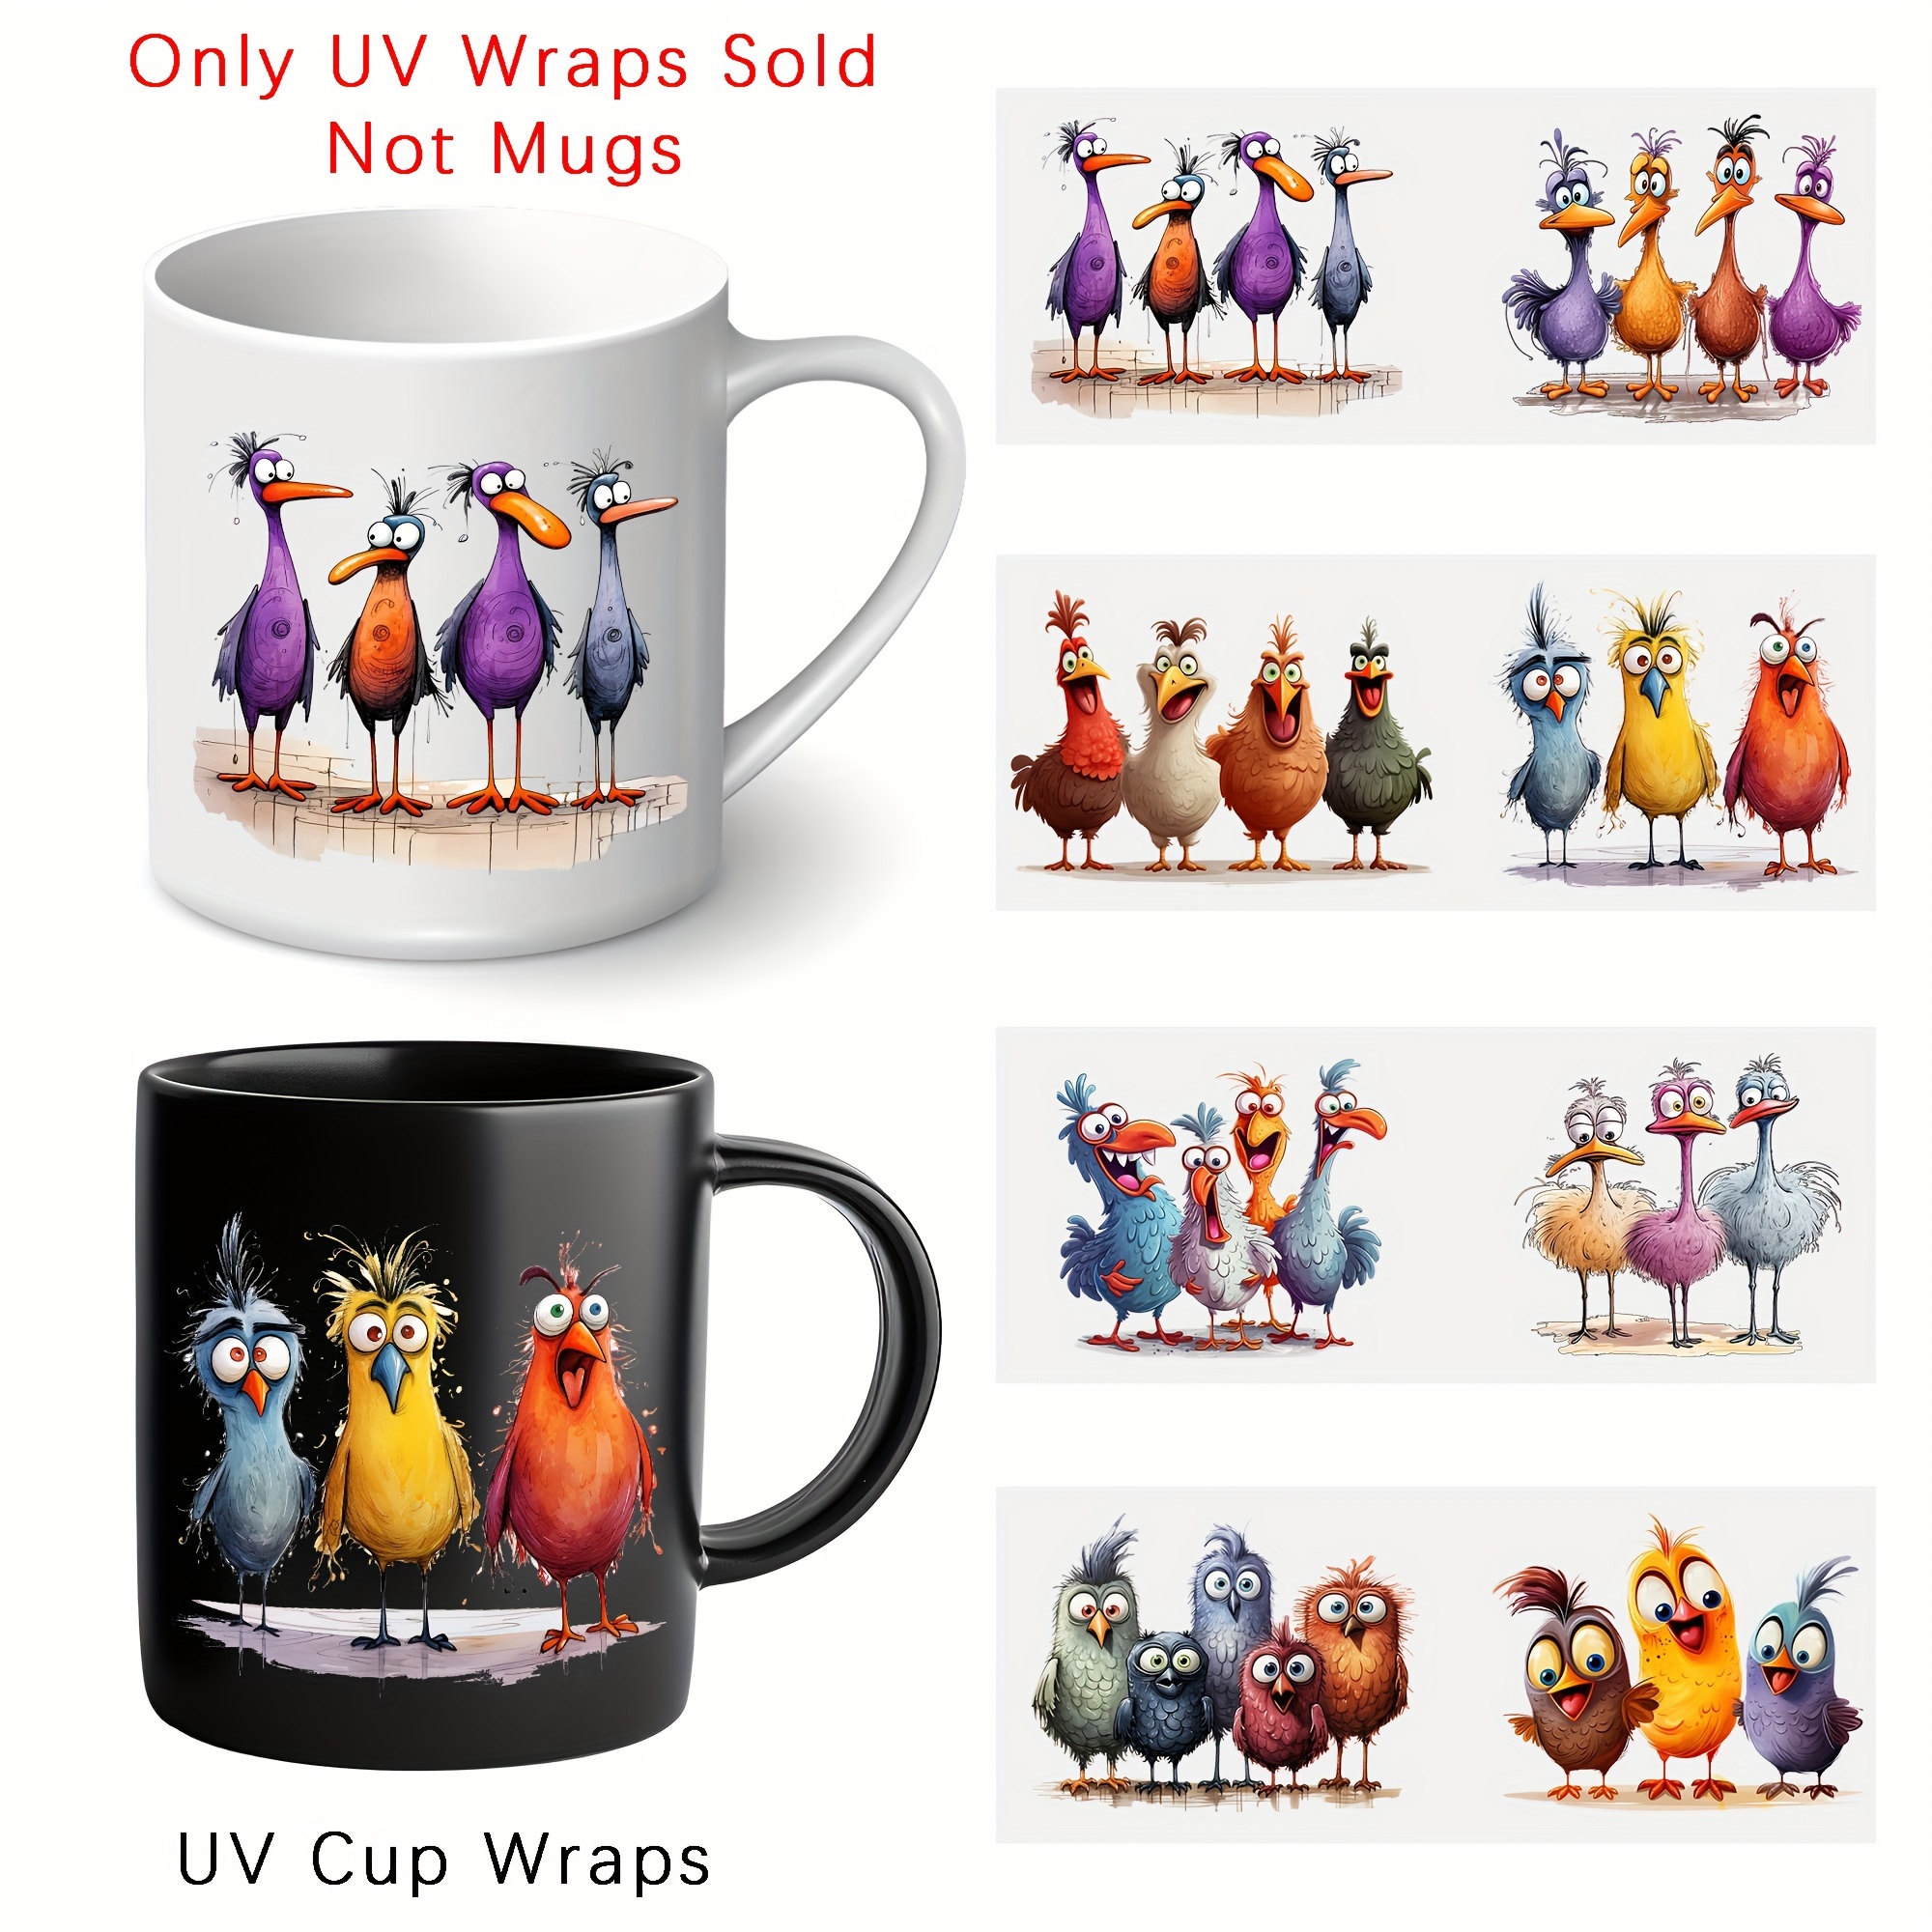 

4-piece Uv Dtf Cup Wraps With Fun Chicken & Duck Designs - Waterproof, Self-adhesive Decals For 11oz Mugs & Cups, Diy Craft Stickers (3.2"x7.8")